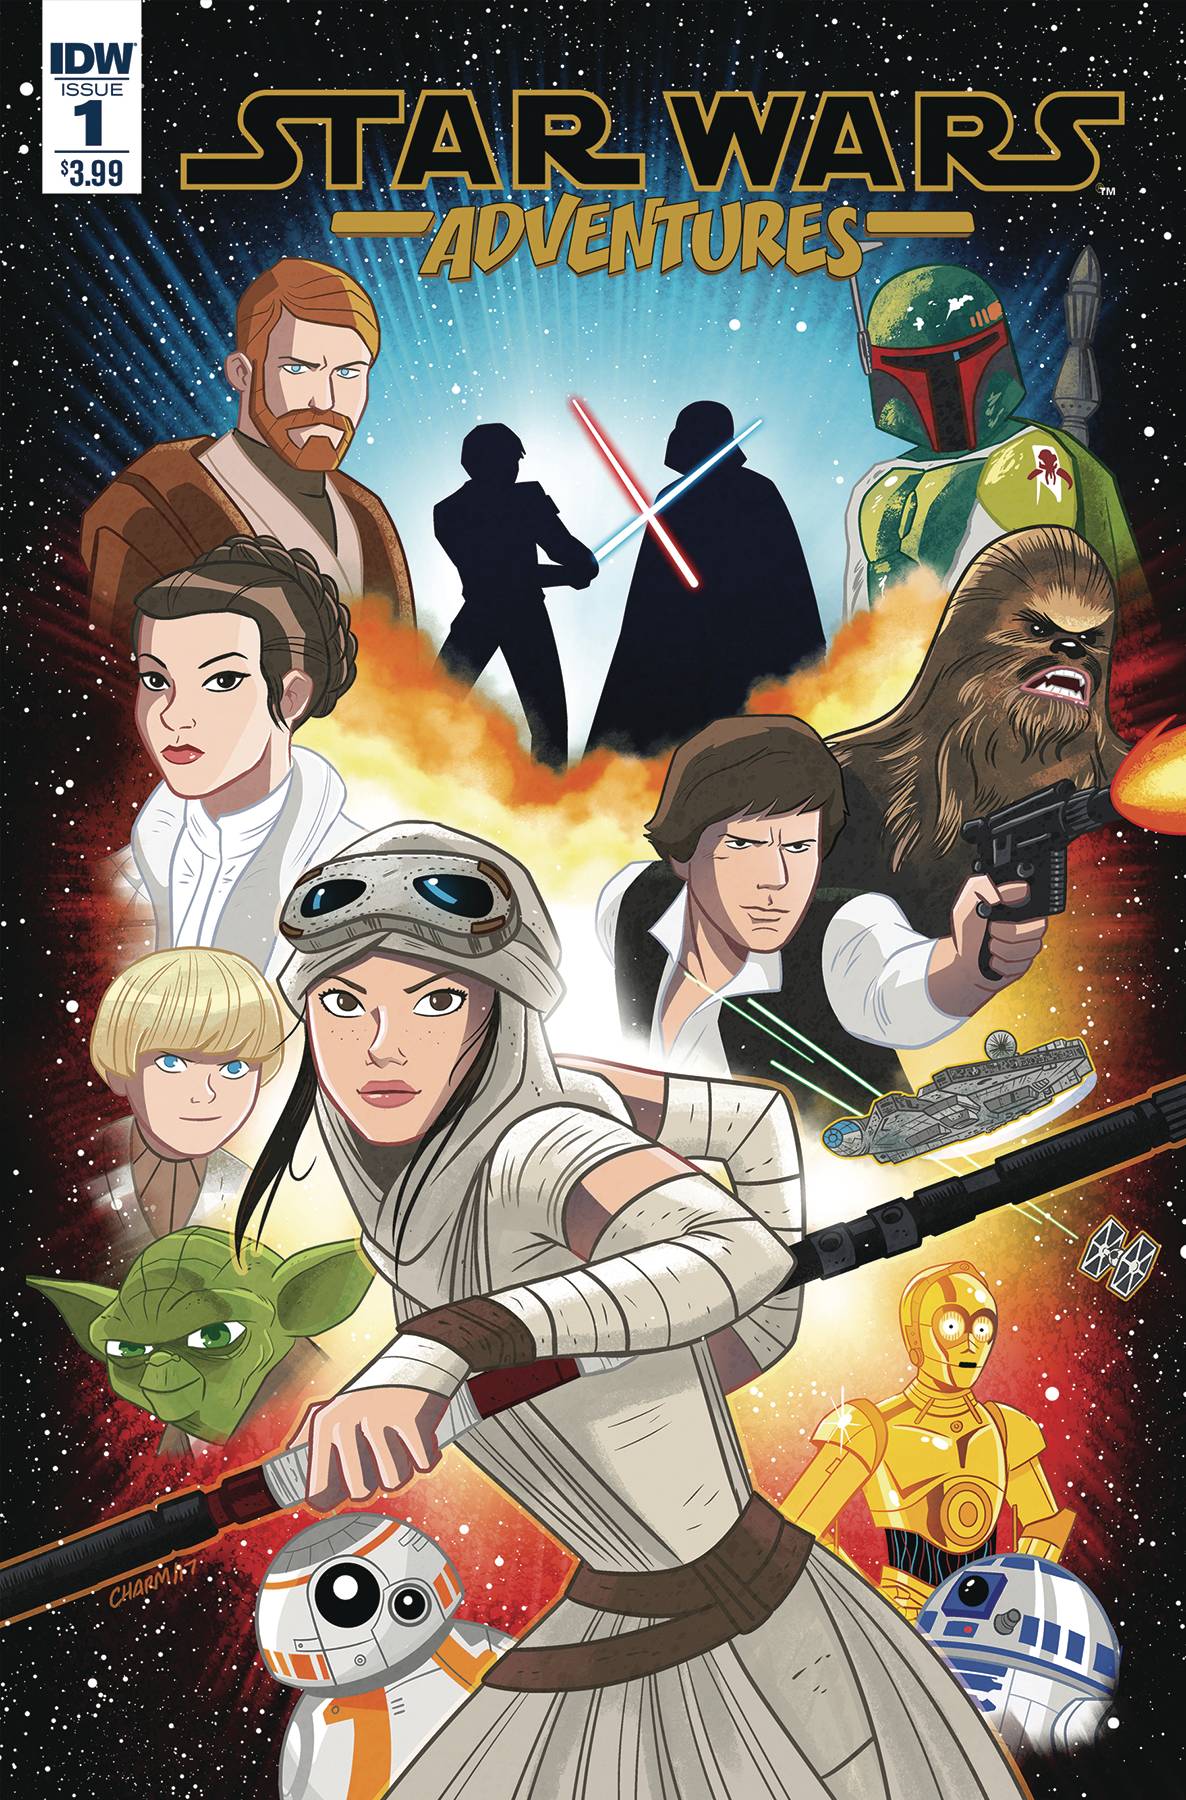 Star Wars Adventures #1 Cover A Charm